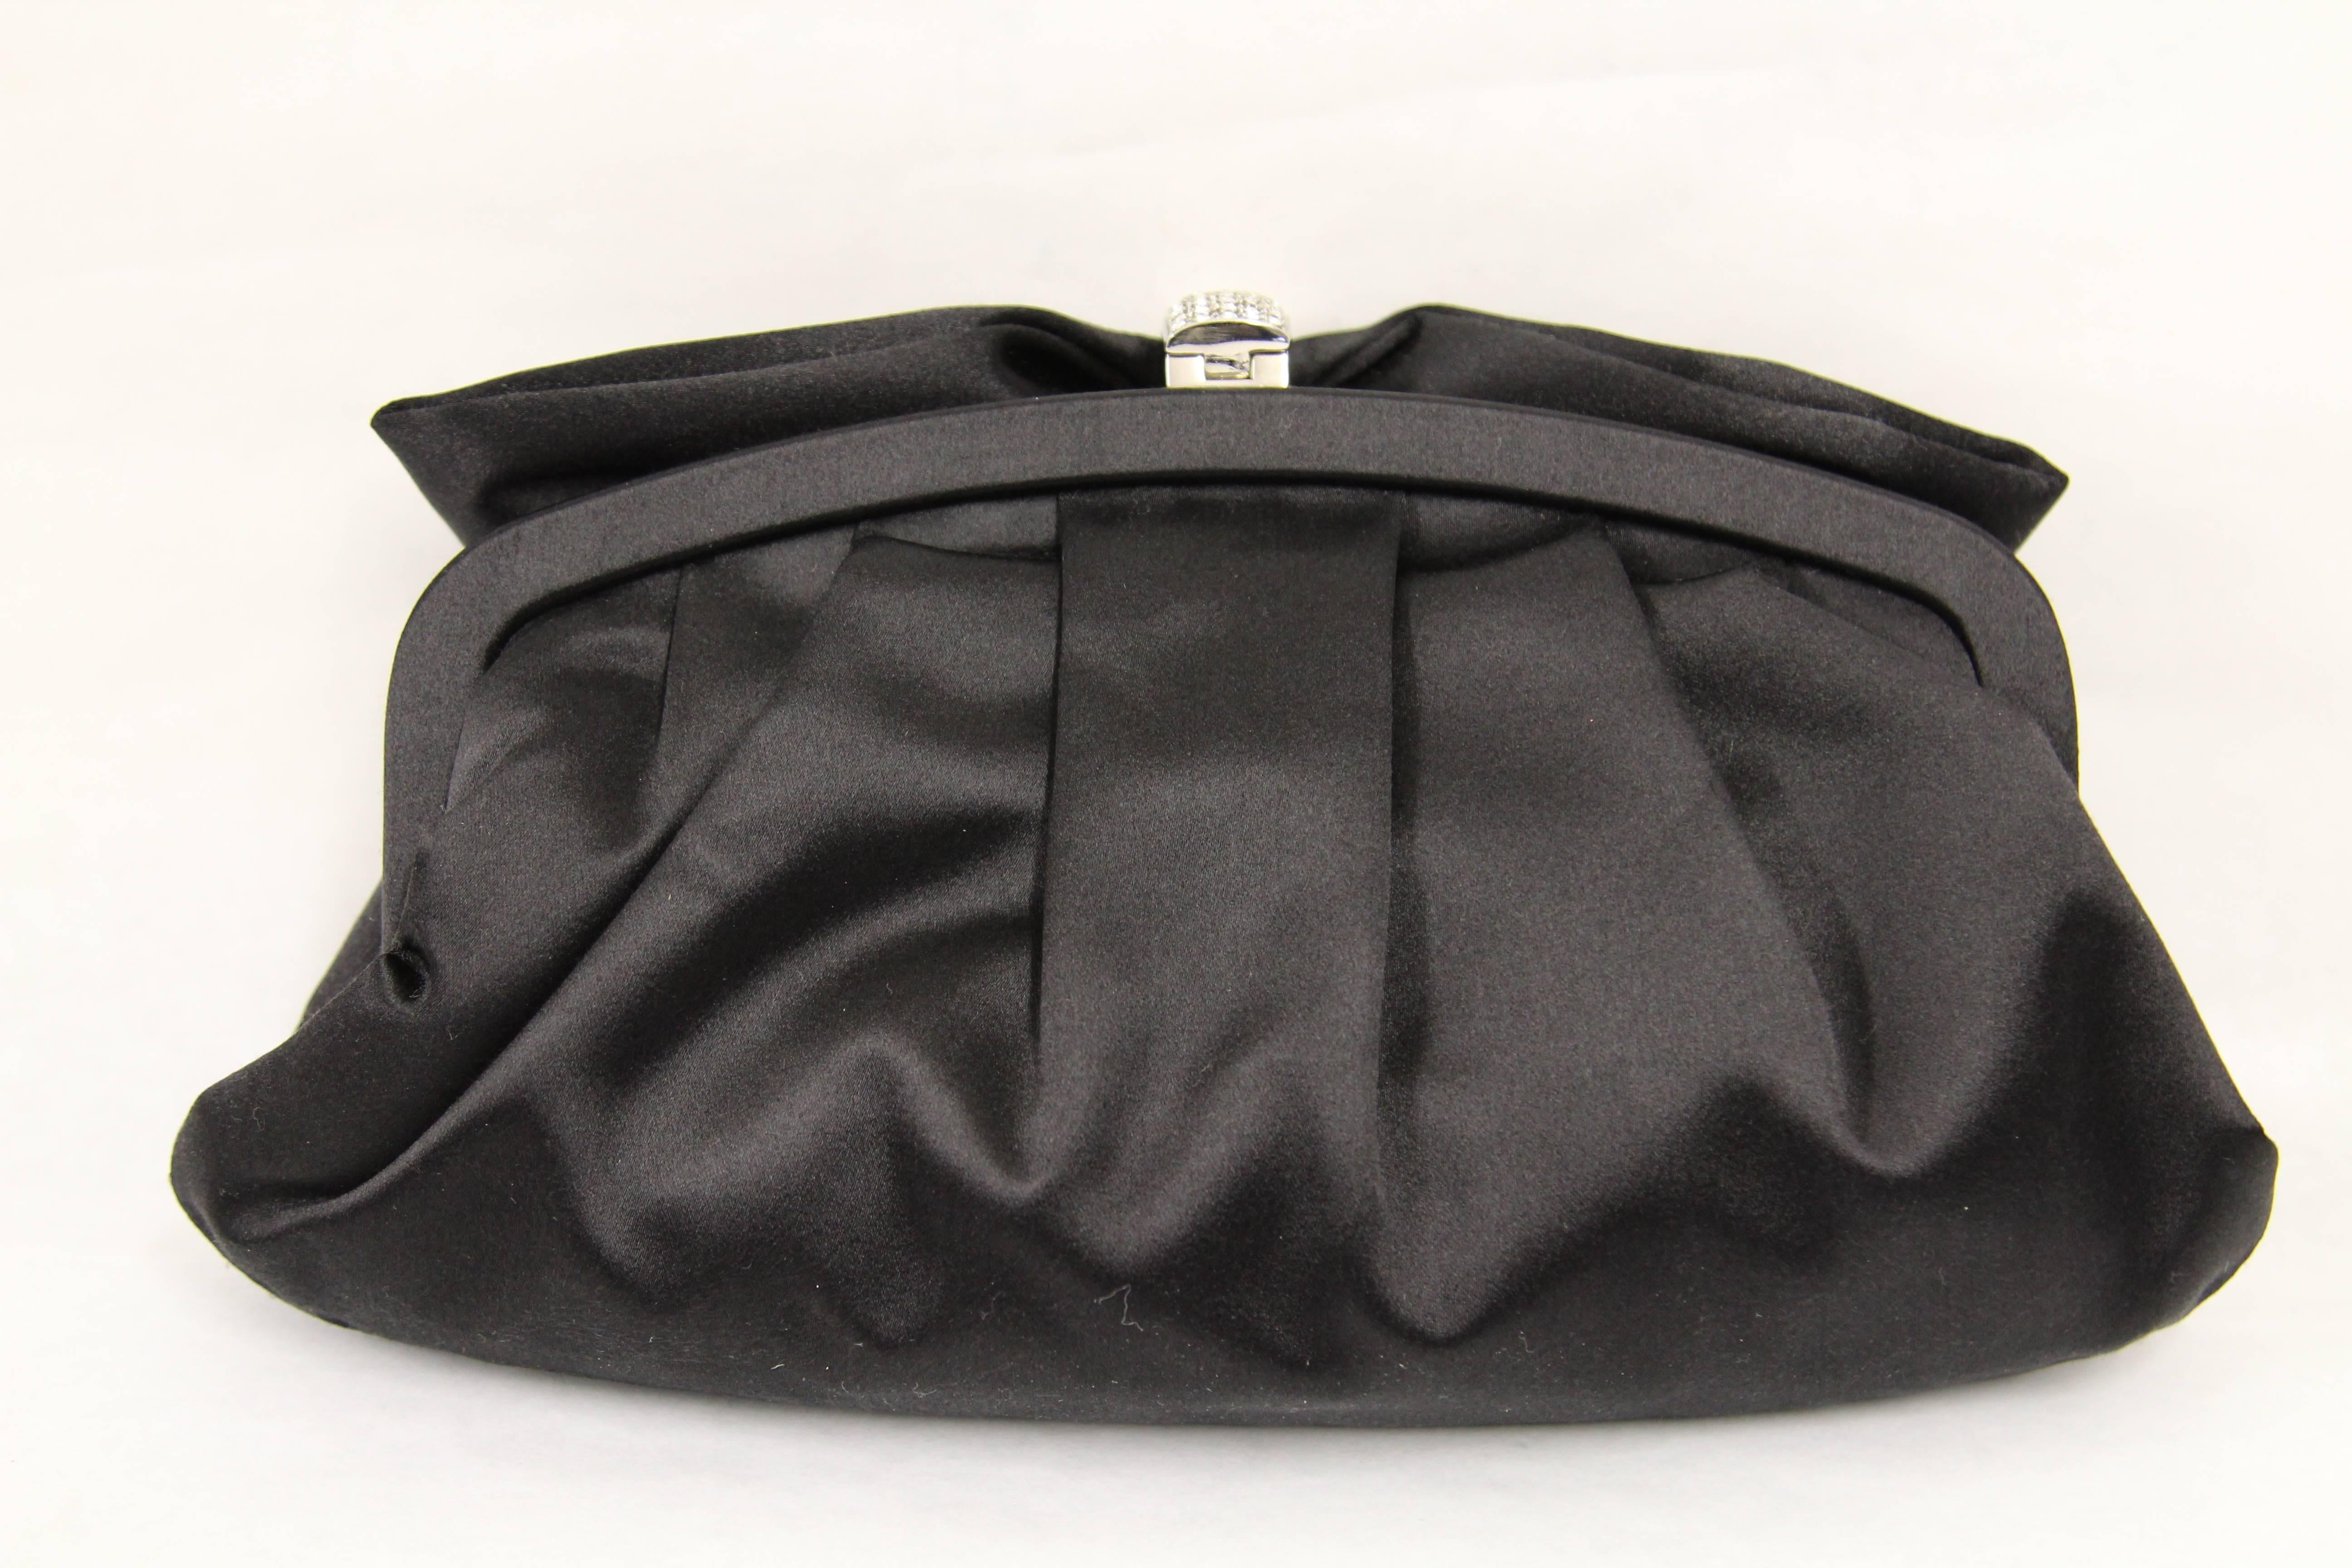 Valentino black satin silk bow-clutch featuring a silver chain shoulderstrap: the clutch can be easily worn on the shoulder. Metal closure.
Measurements: 26 cm x 13 cm x 3 cm
The item has never been worn: excellent conditions.